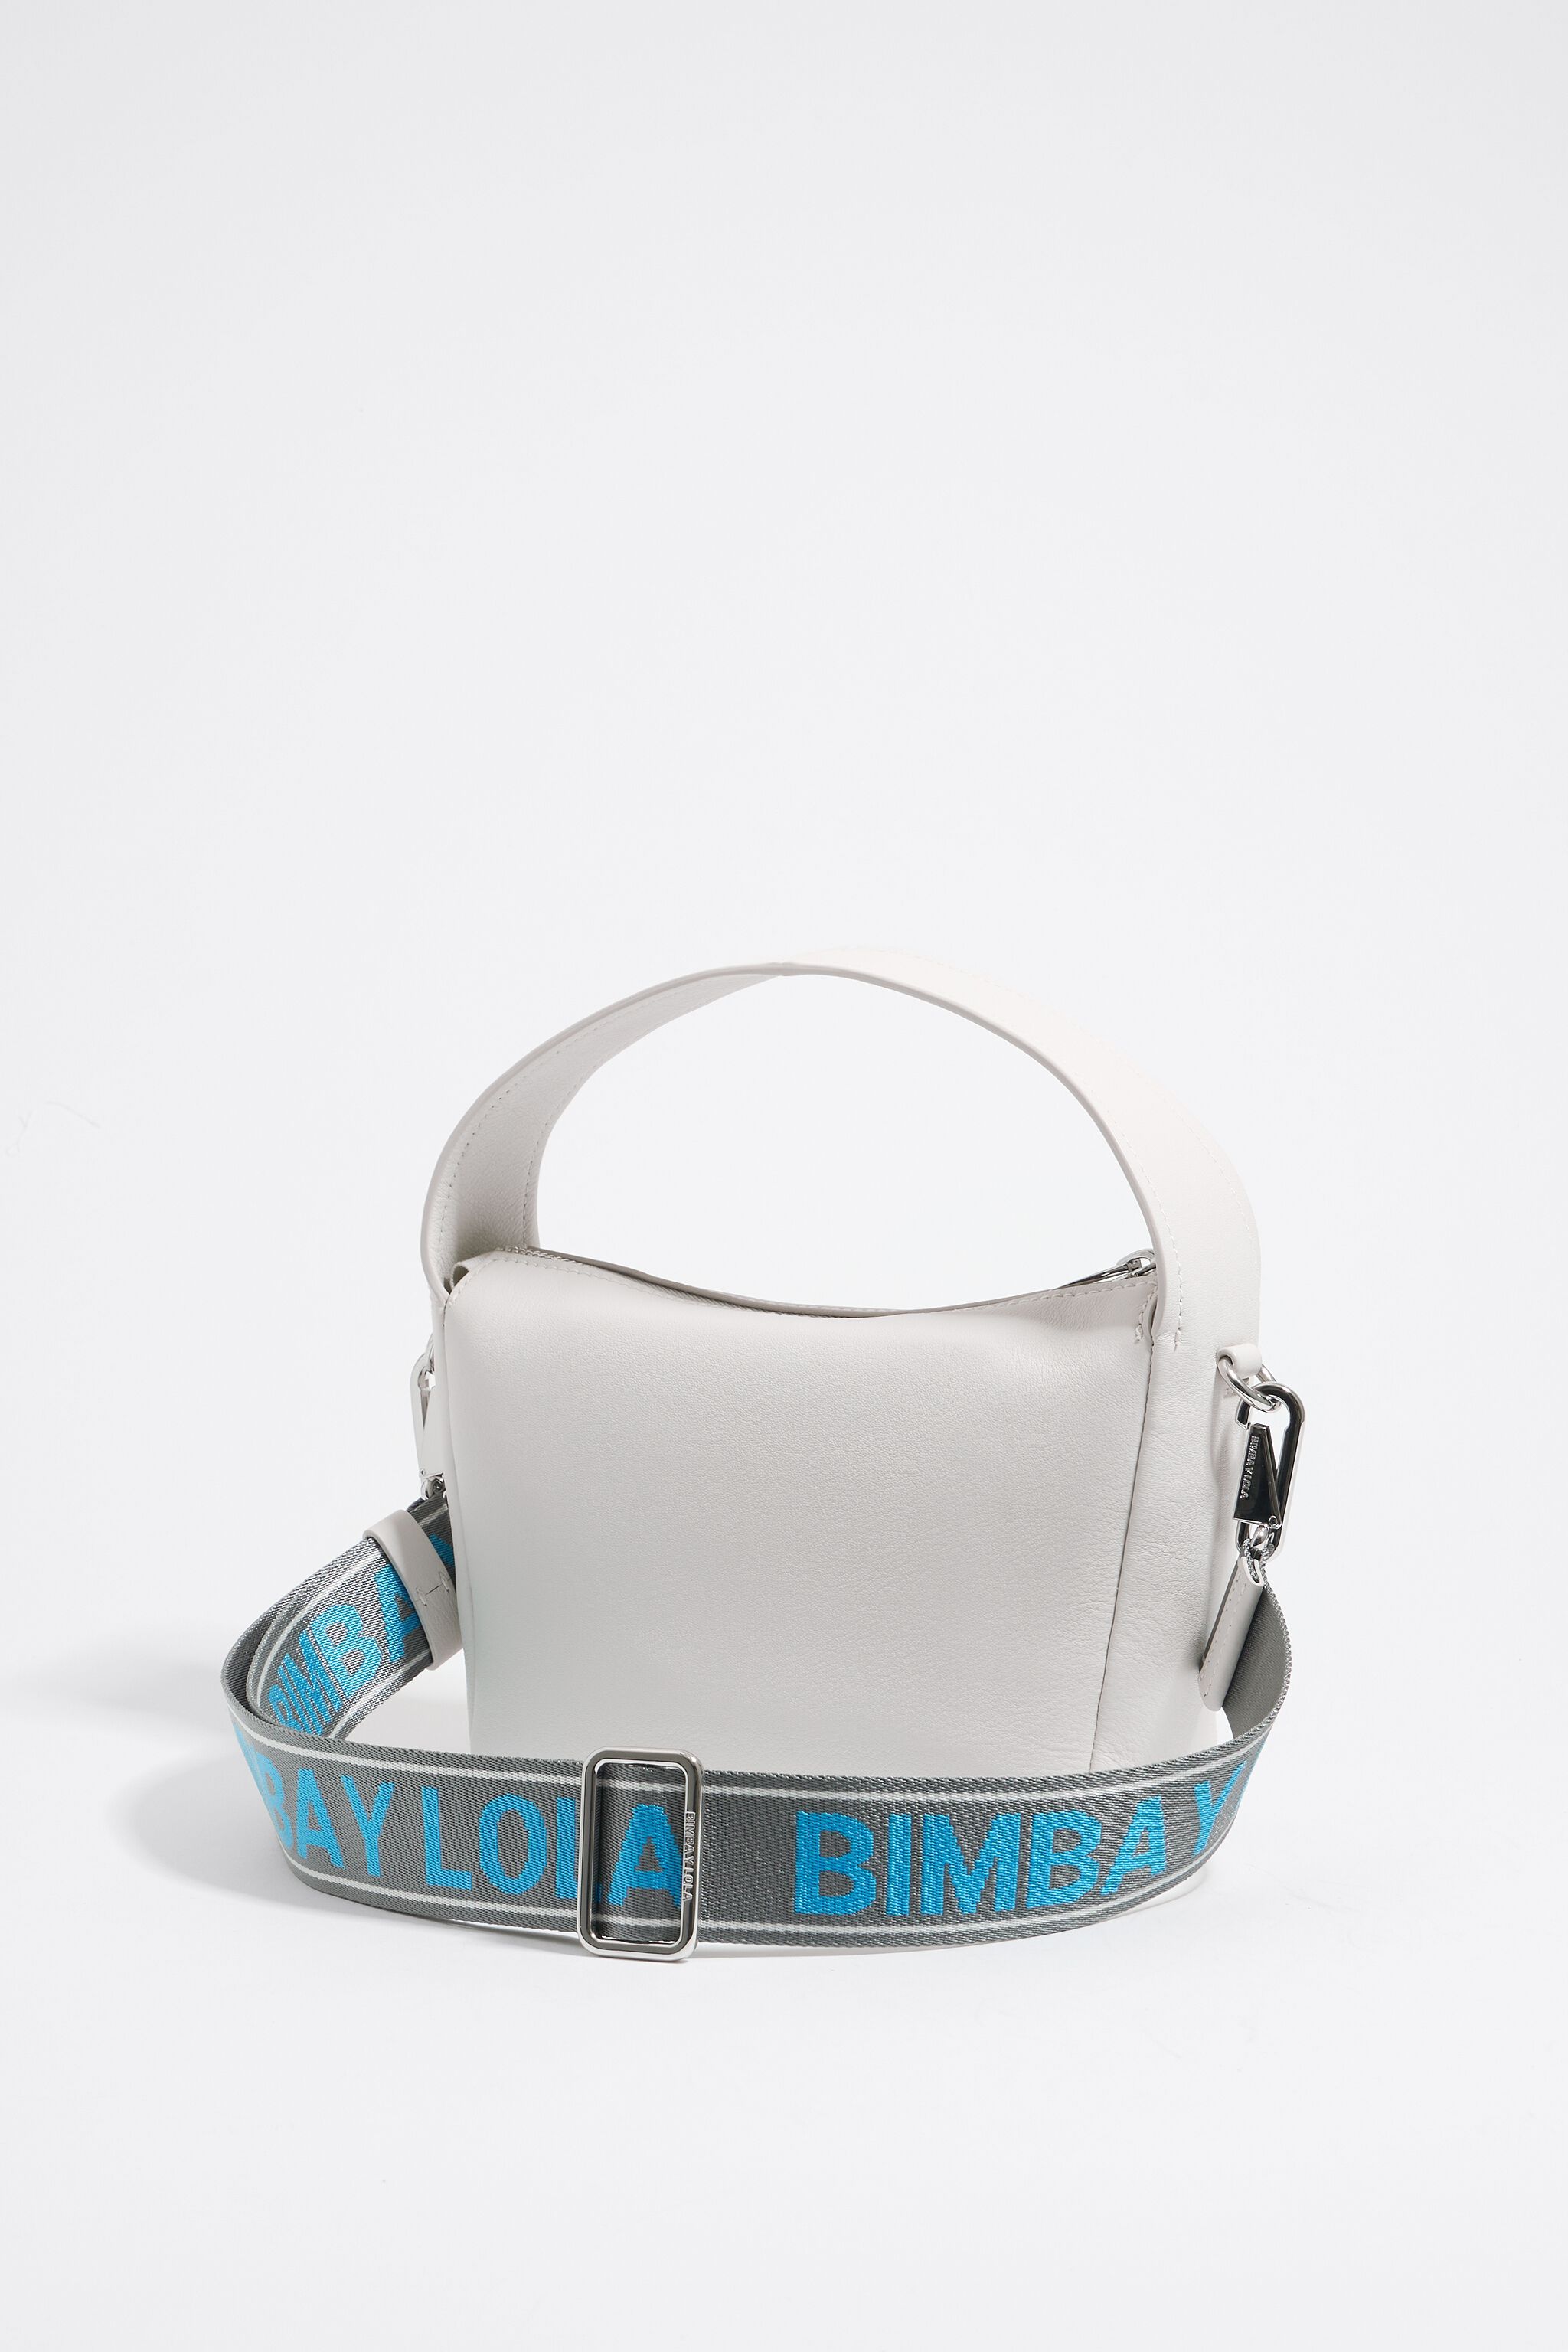 S off-white leather slouch bag